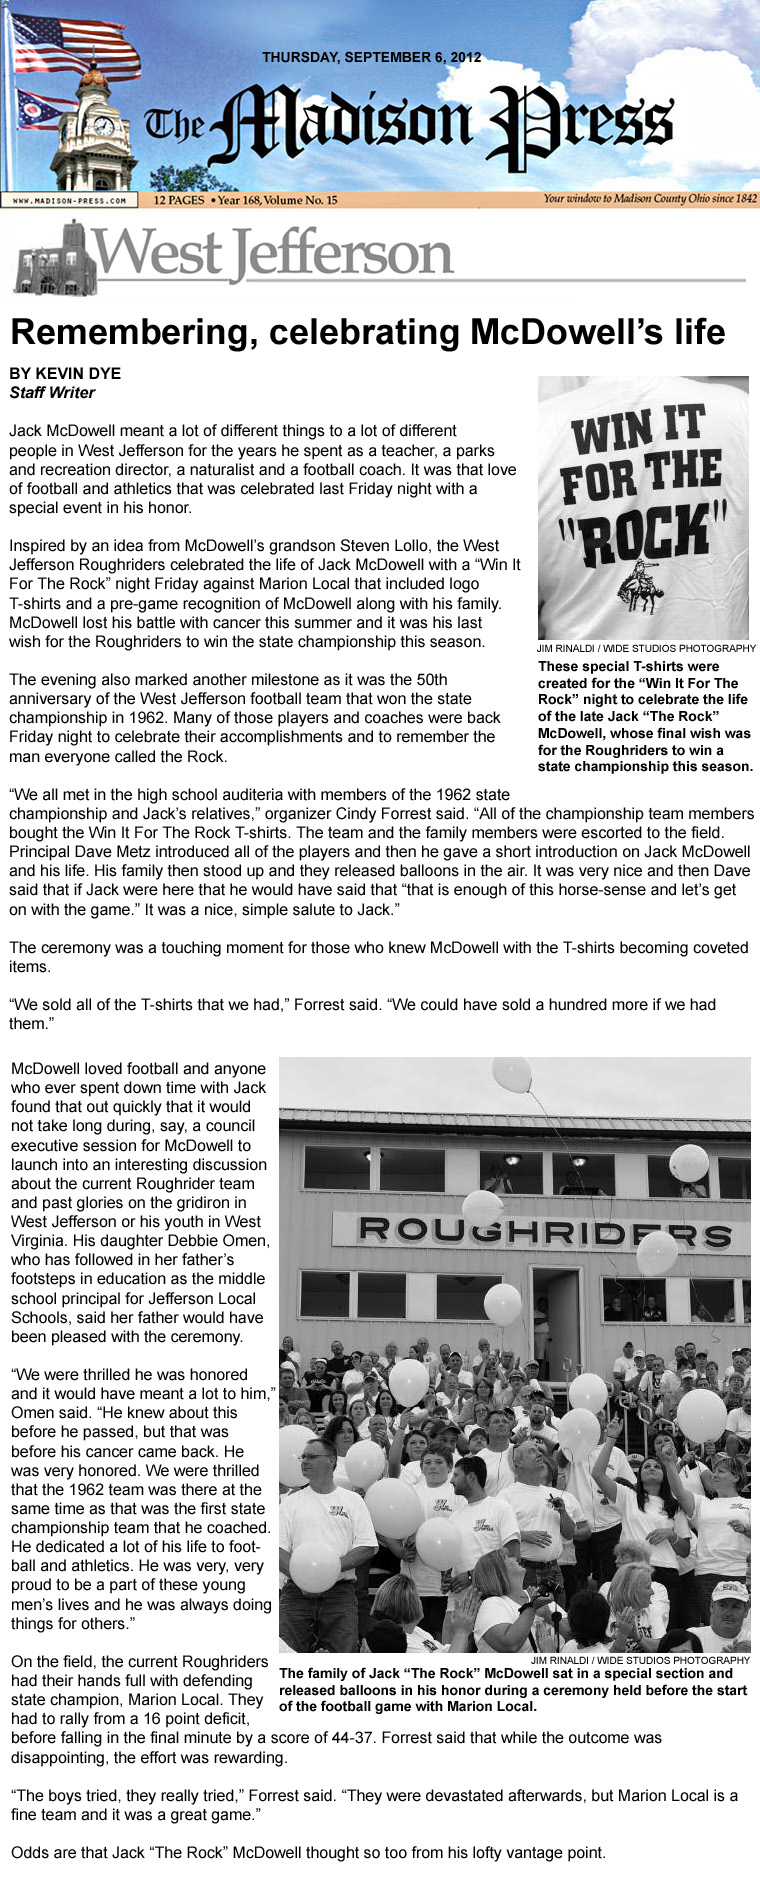 09-06-12 - Madison Press article: Remembering, celebrating McDowell's life